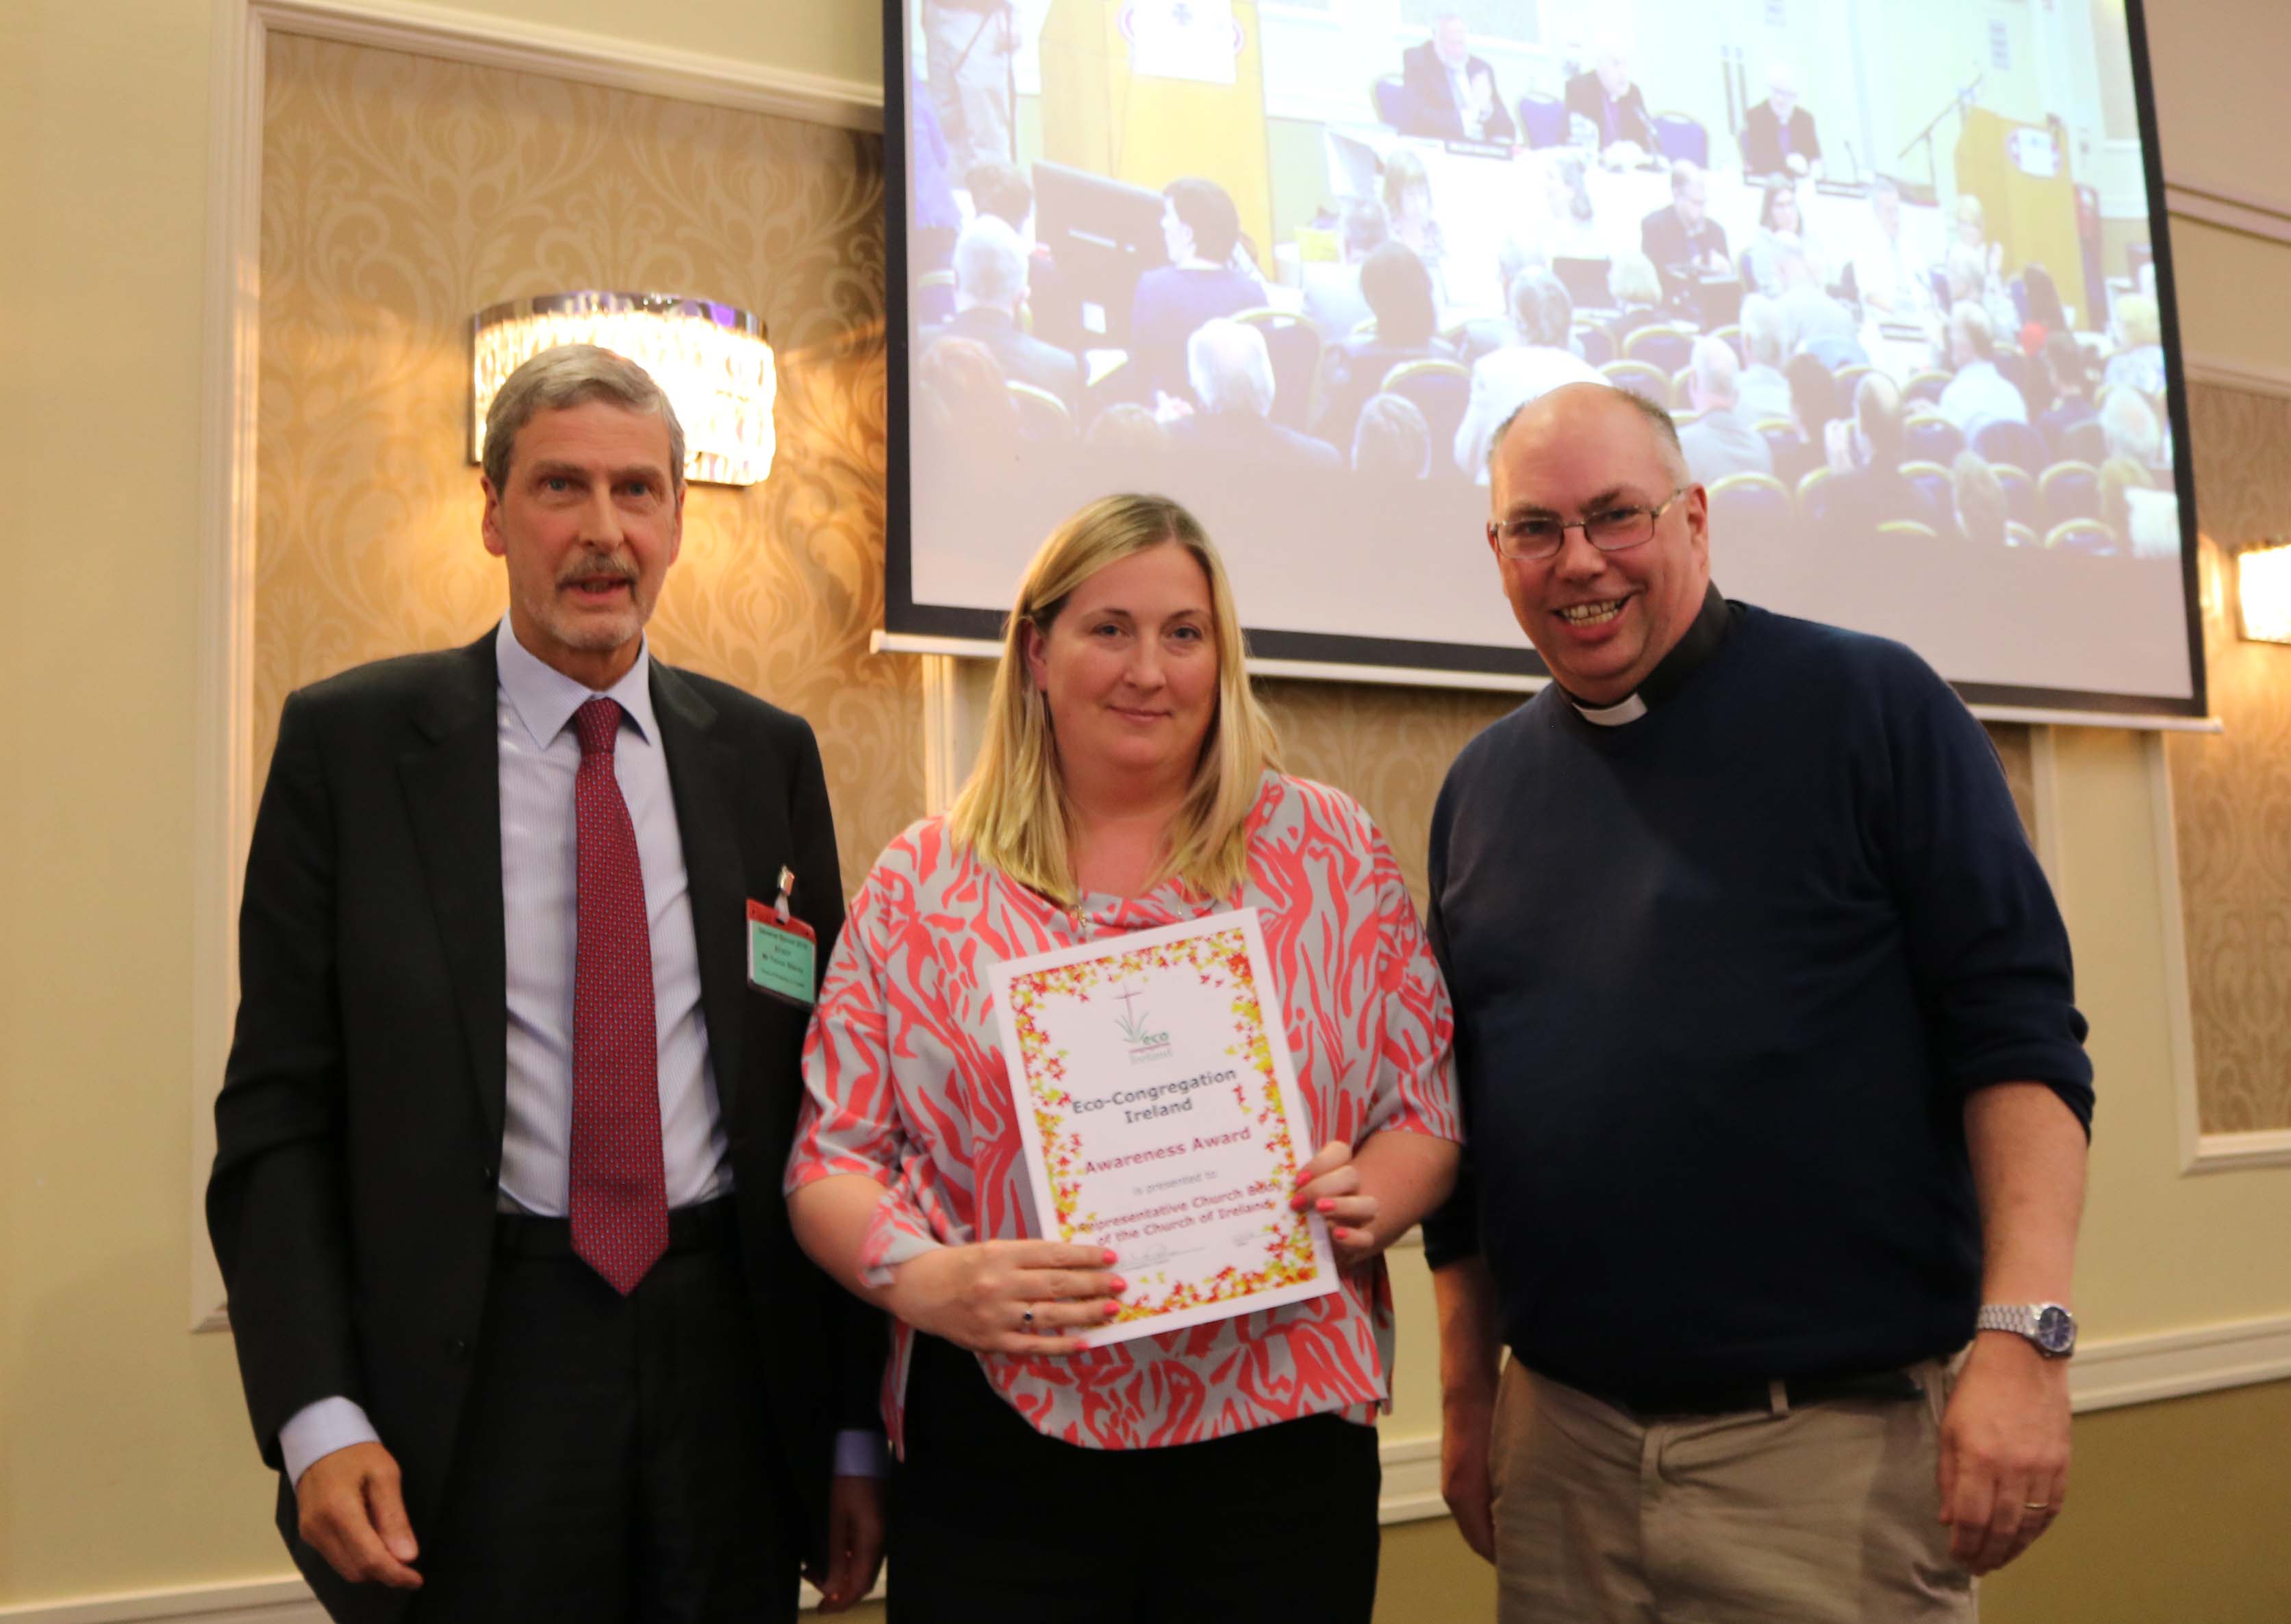 Archdeacon Andrew Orr, Chair of Eco Congregation Ireland, presents an Eco Congregation awareness award to Sarah Dunne, Manager – Investment Portfolio and ESG, and Trevor Stacey, Head of Property, Representative Church Body.